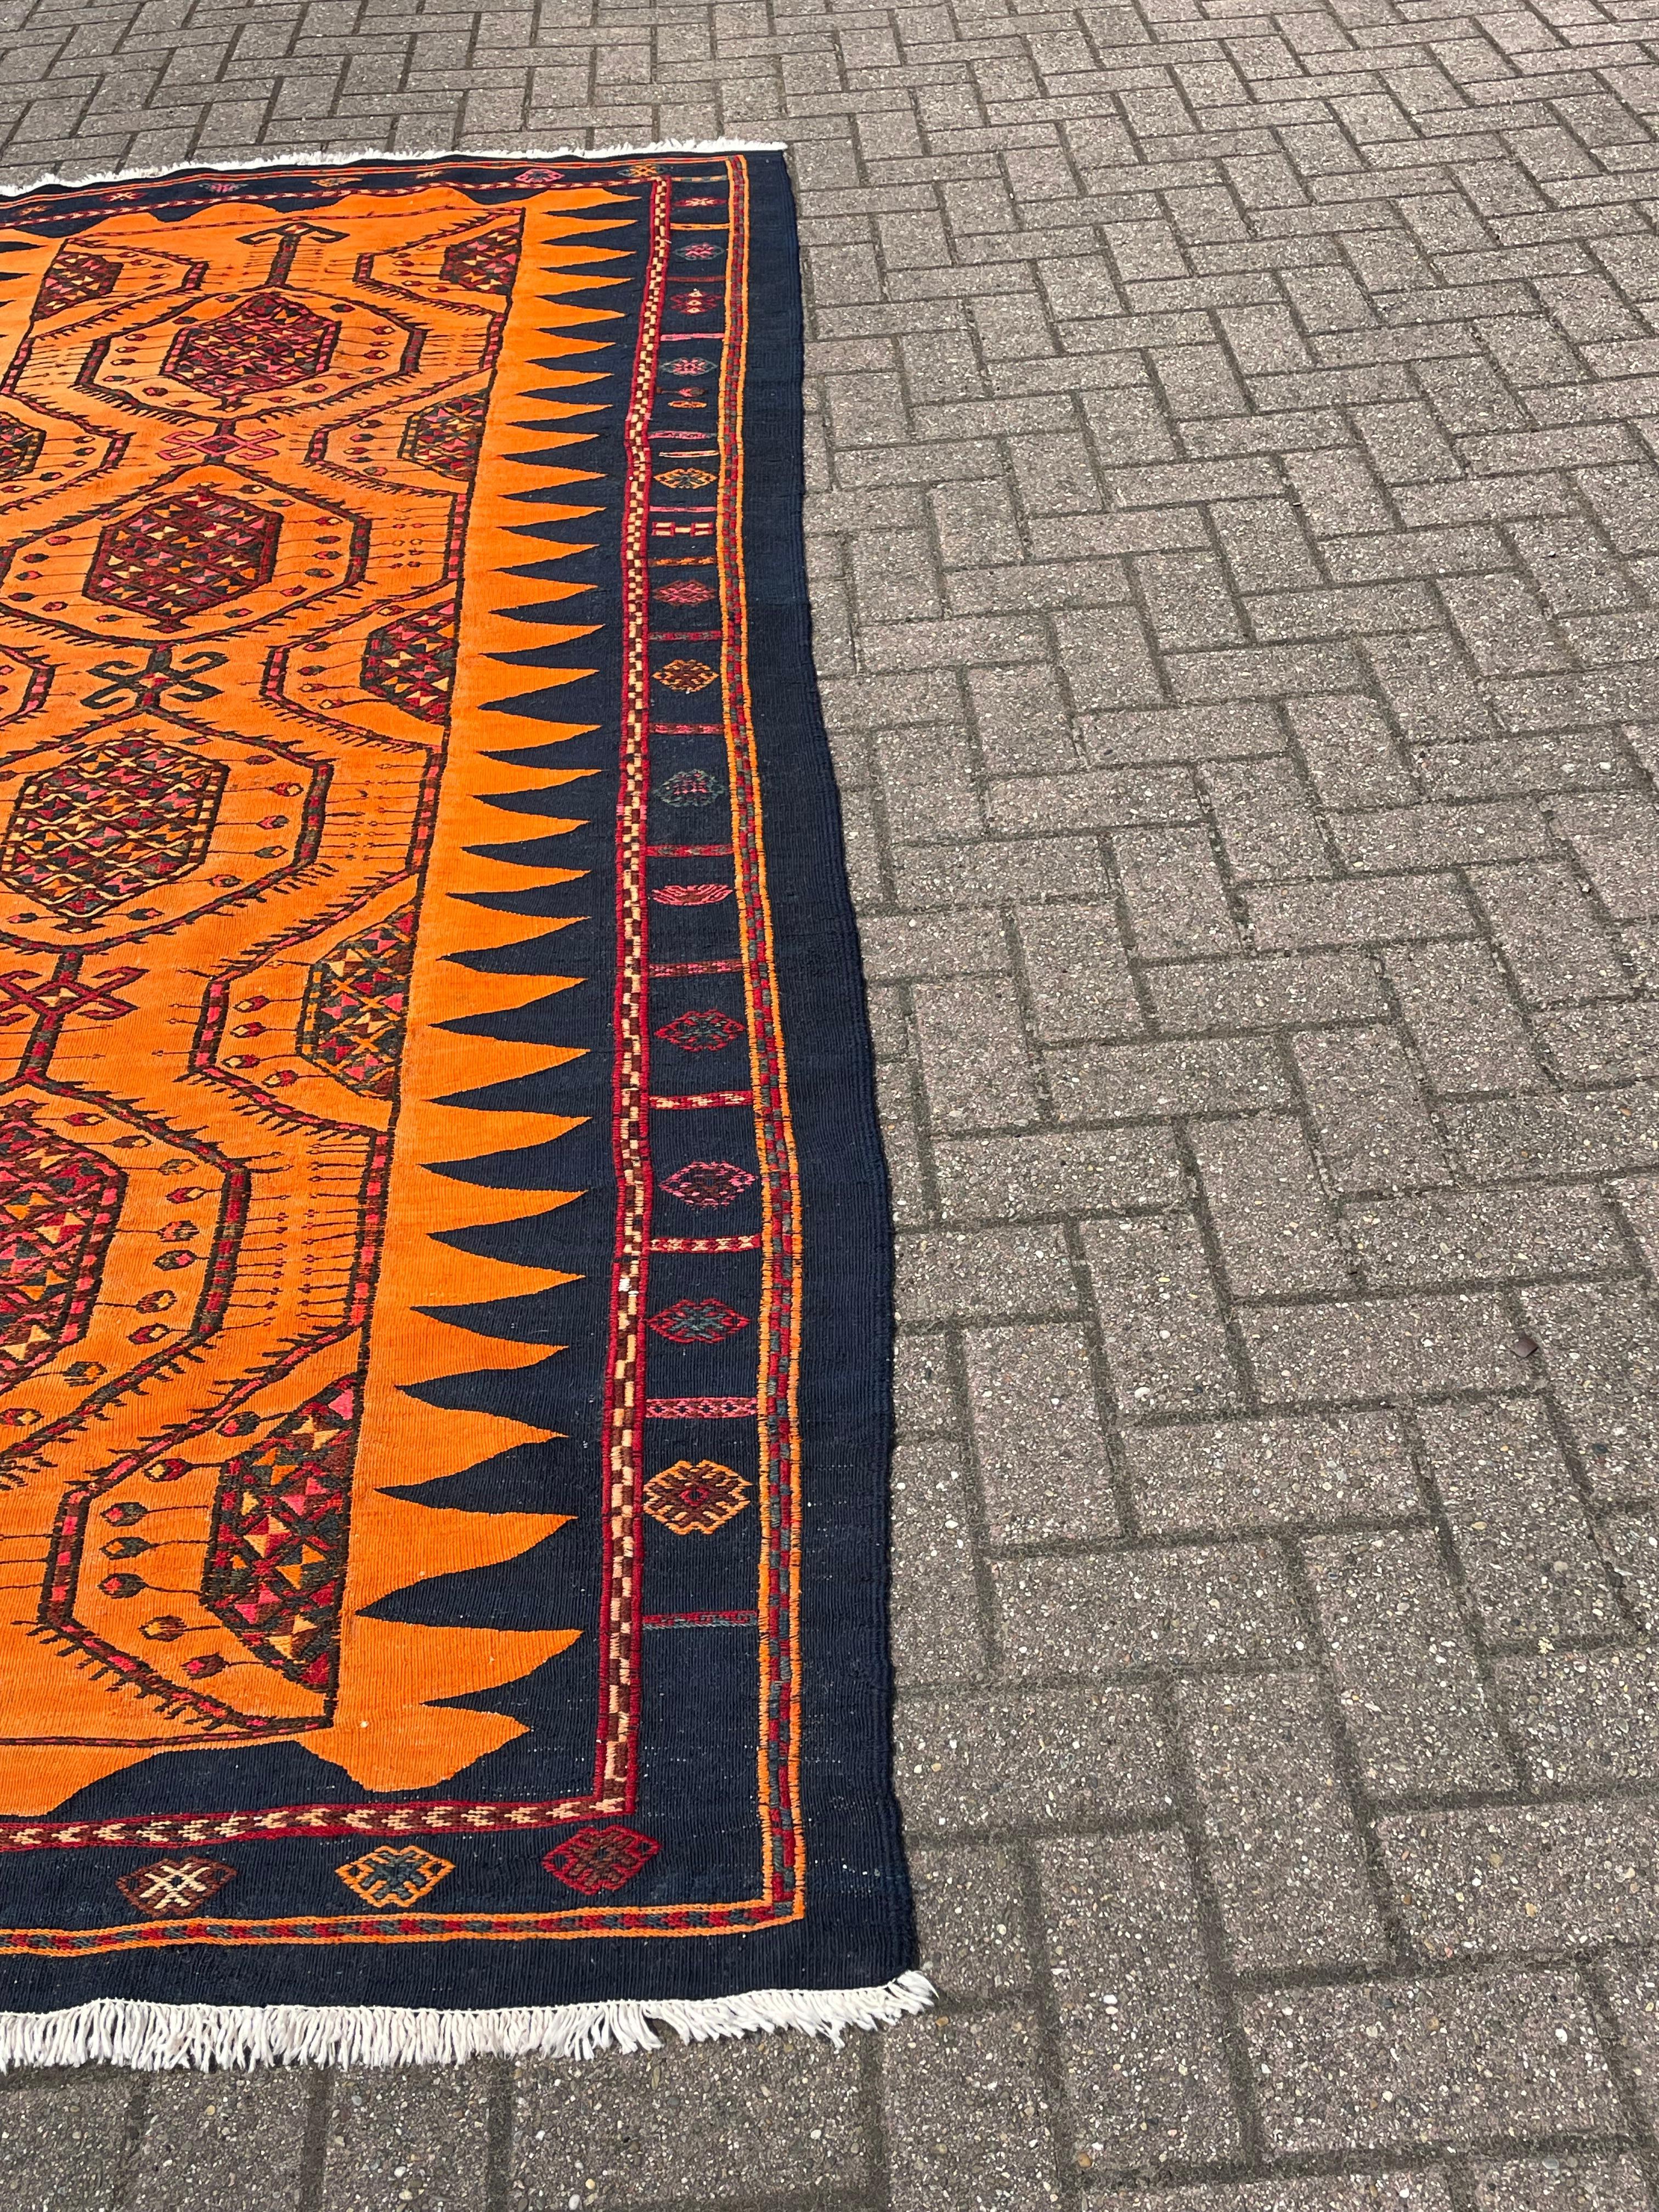 Stunning & Large Size Hand Knotted Kilim Rug Midcentury Design w. Vibrant Colors For Sale 5